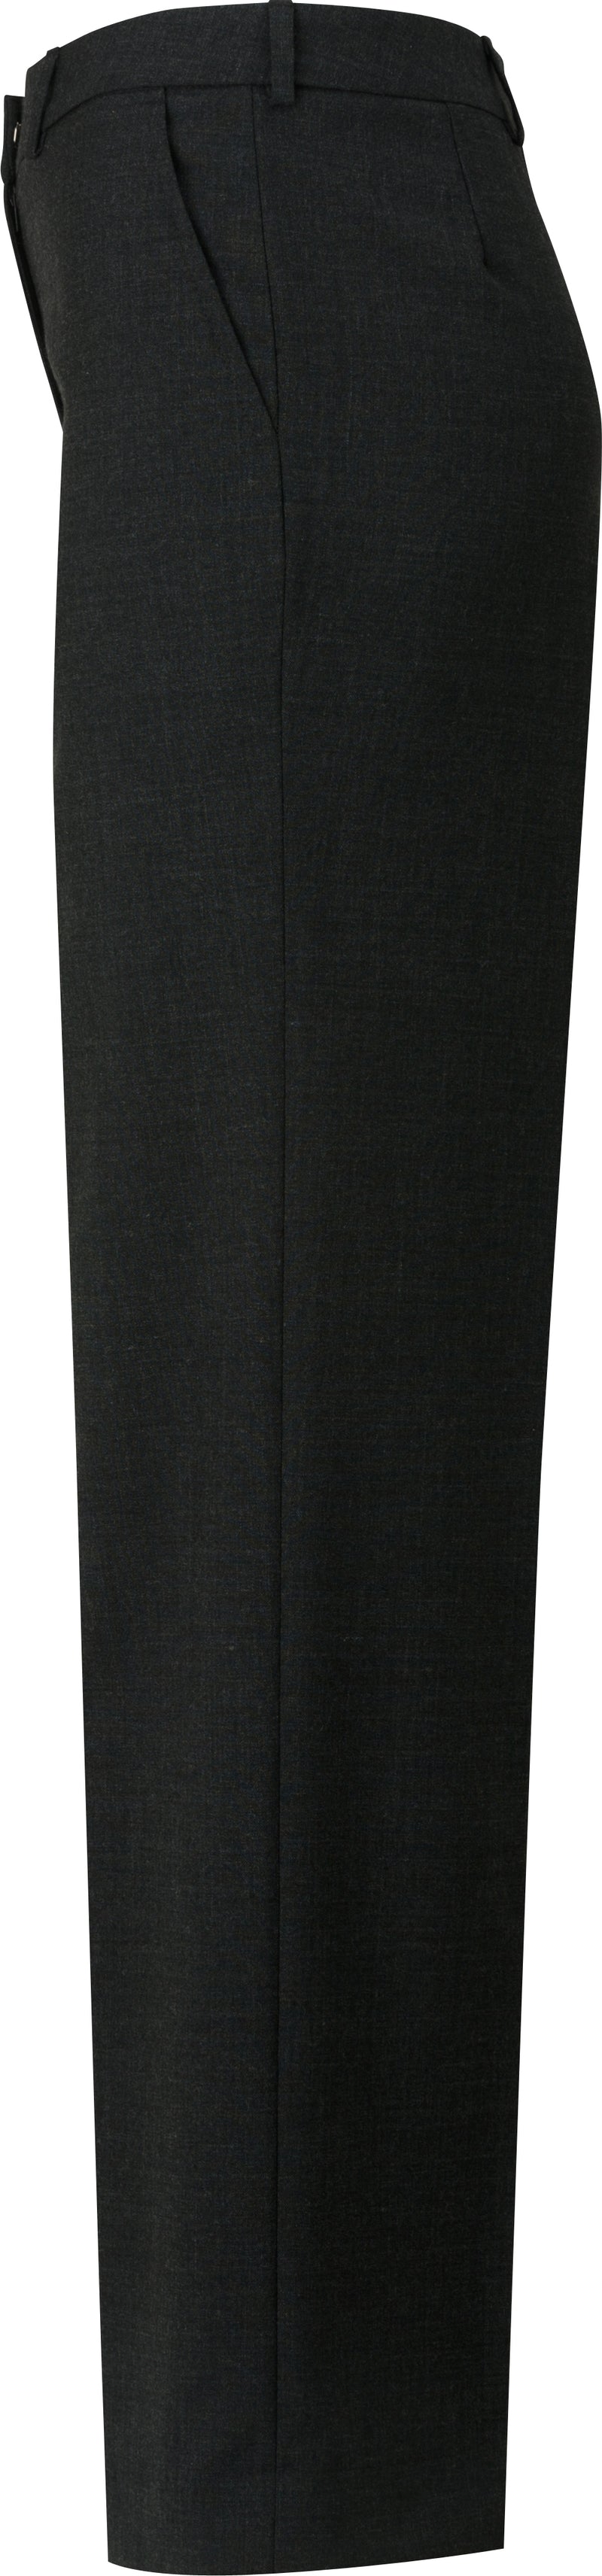 Edwards [8733] Ladies Flat-Front Dress Pant. Redwood & Ross Signature Collection. Live Chat For Bulk Discounts.